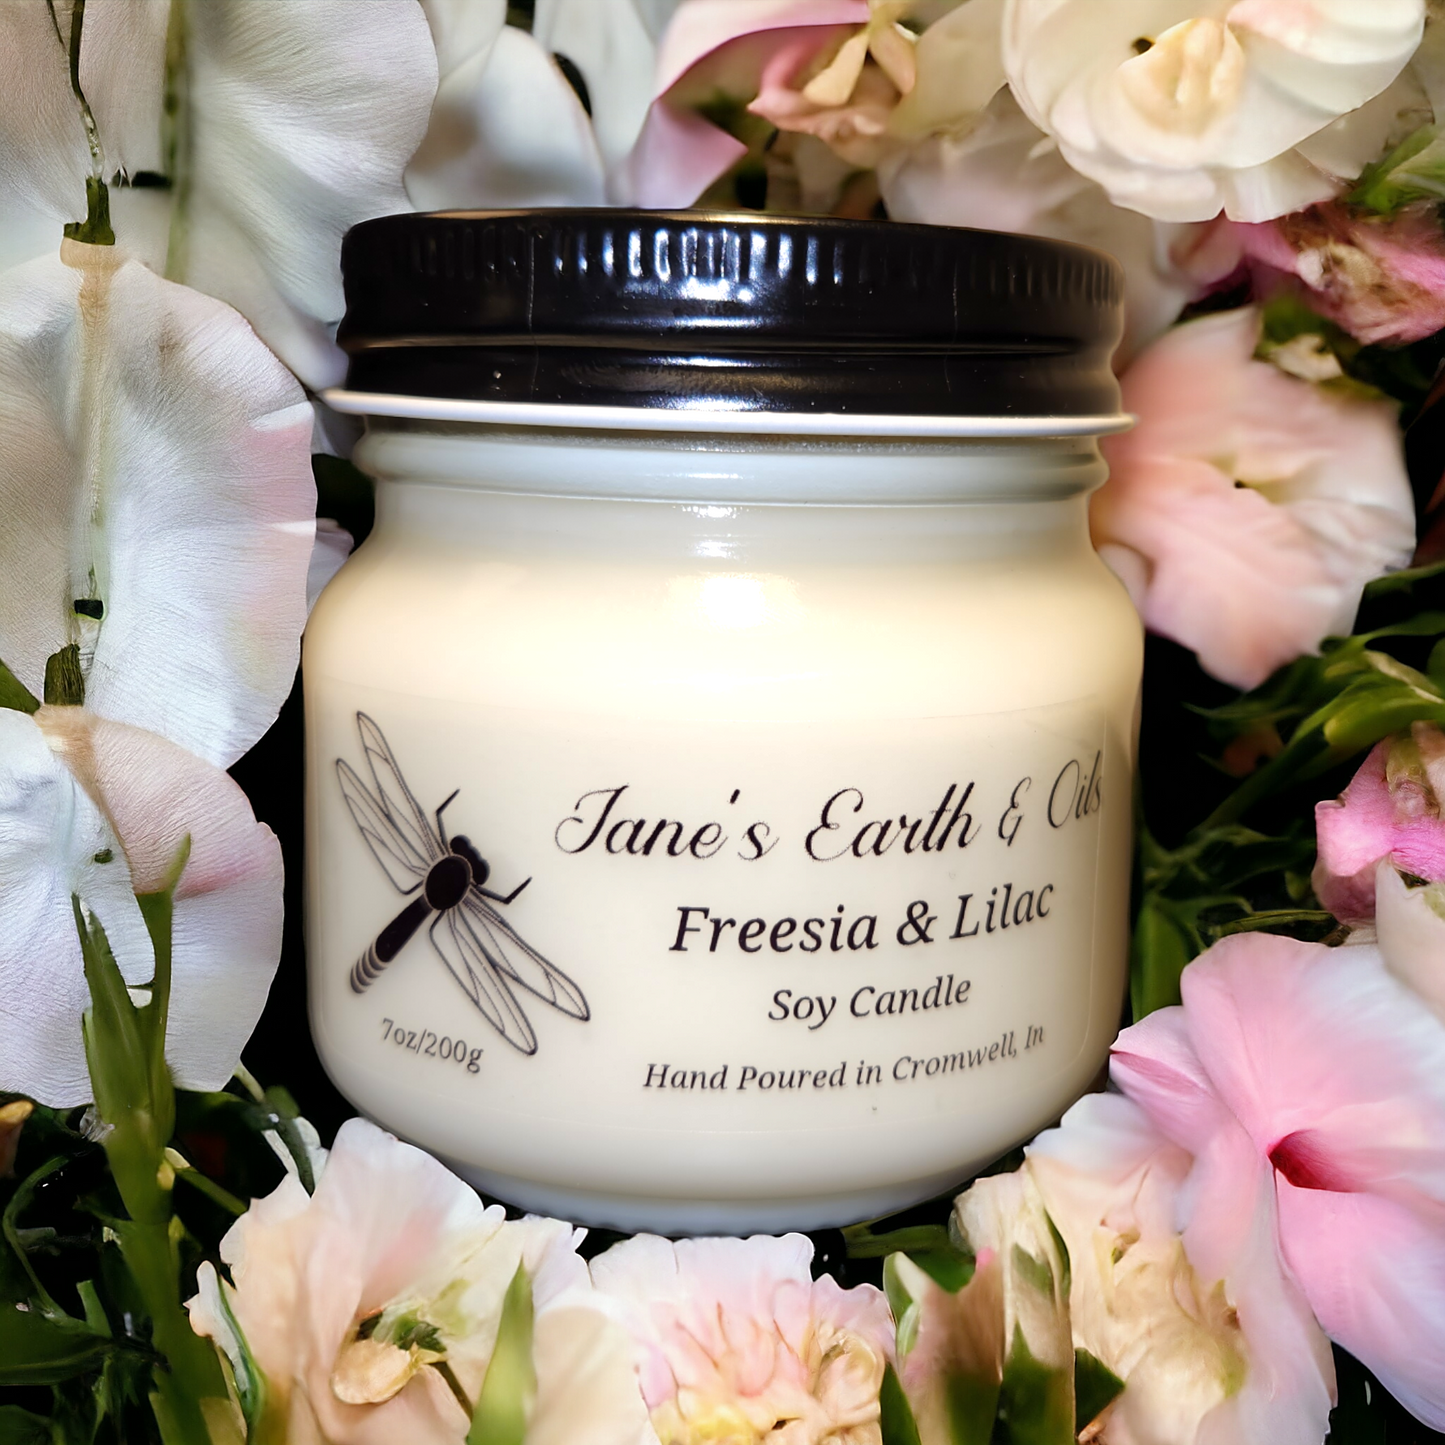 Freesia & Lilac Soy Candle